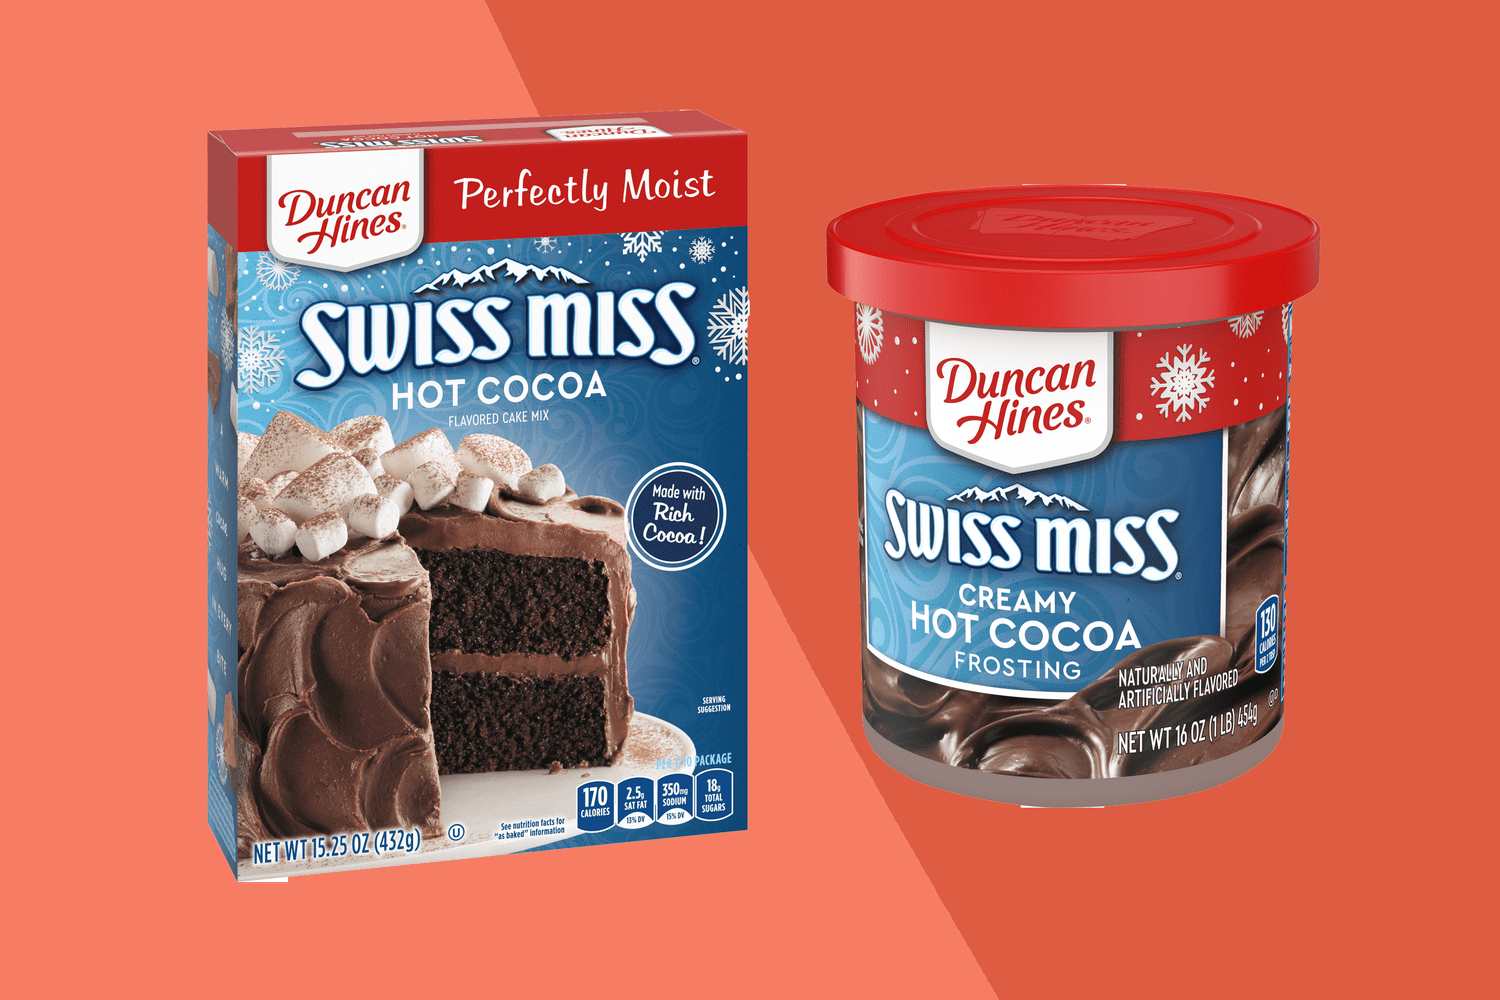 Duncan Hines' Swiss Miss Hot Cocoa Cake Mix and Frosting